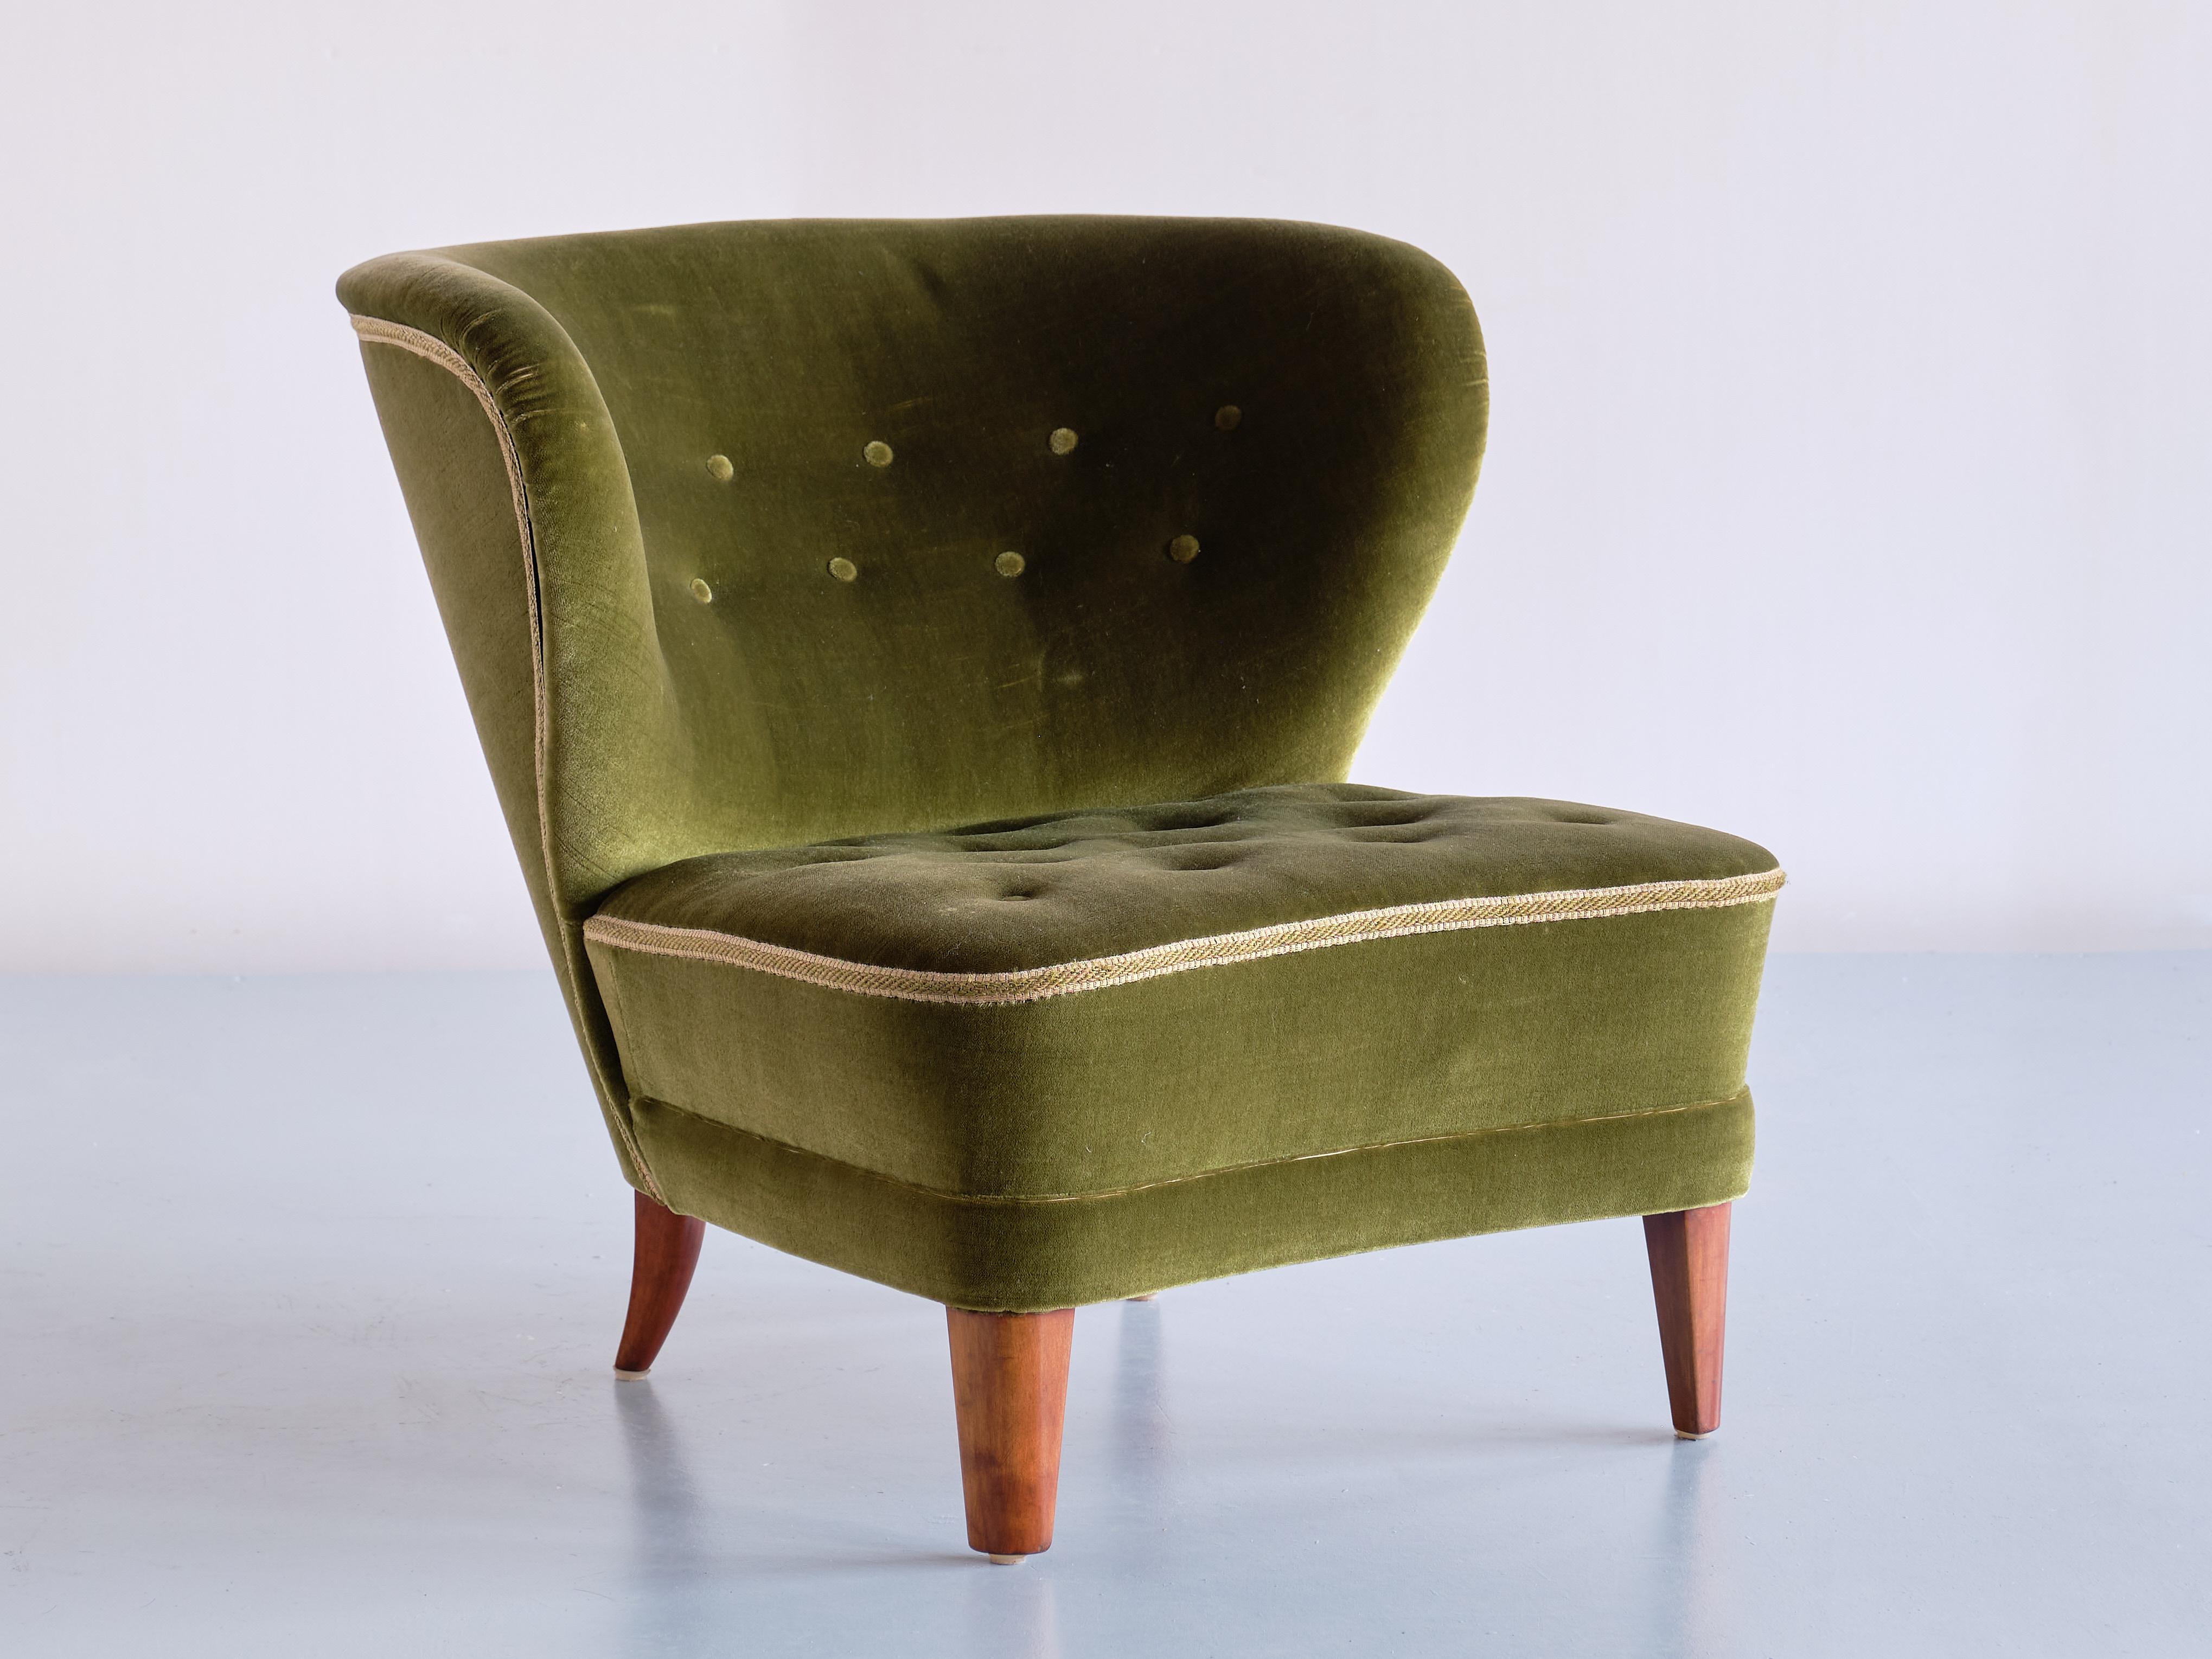 This rare lounge chair was designed by Gösta Jonsson and produced in Jönköping, Sweden in the late 1940s. The beautifully curved backrest with tufted buttons make this a very comfortable and embracing chair. 

The chair retains it's original green